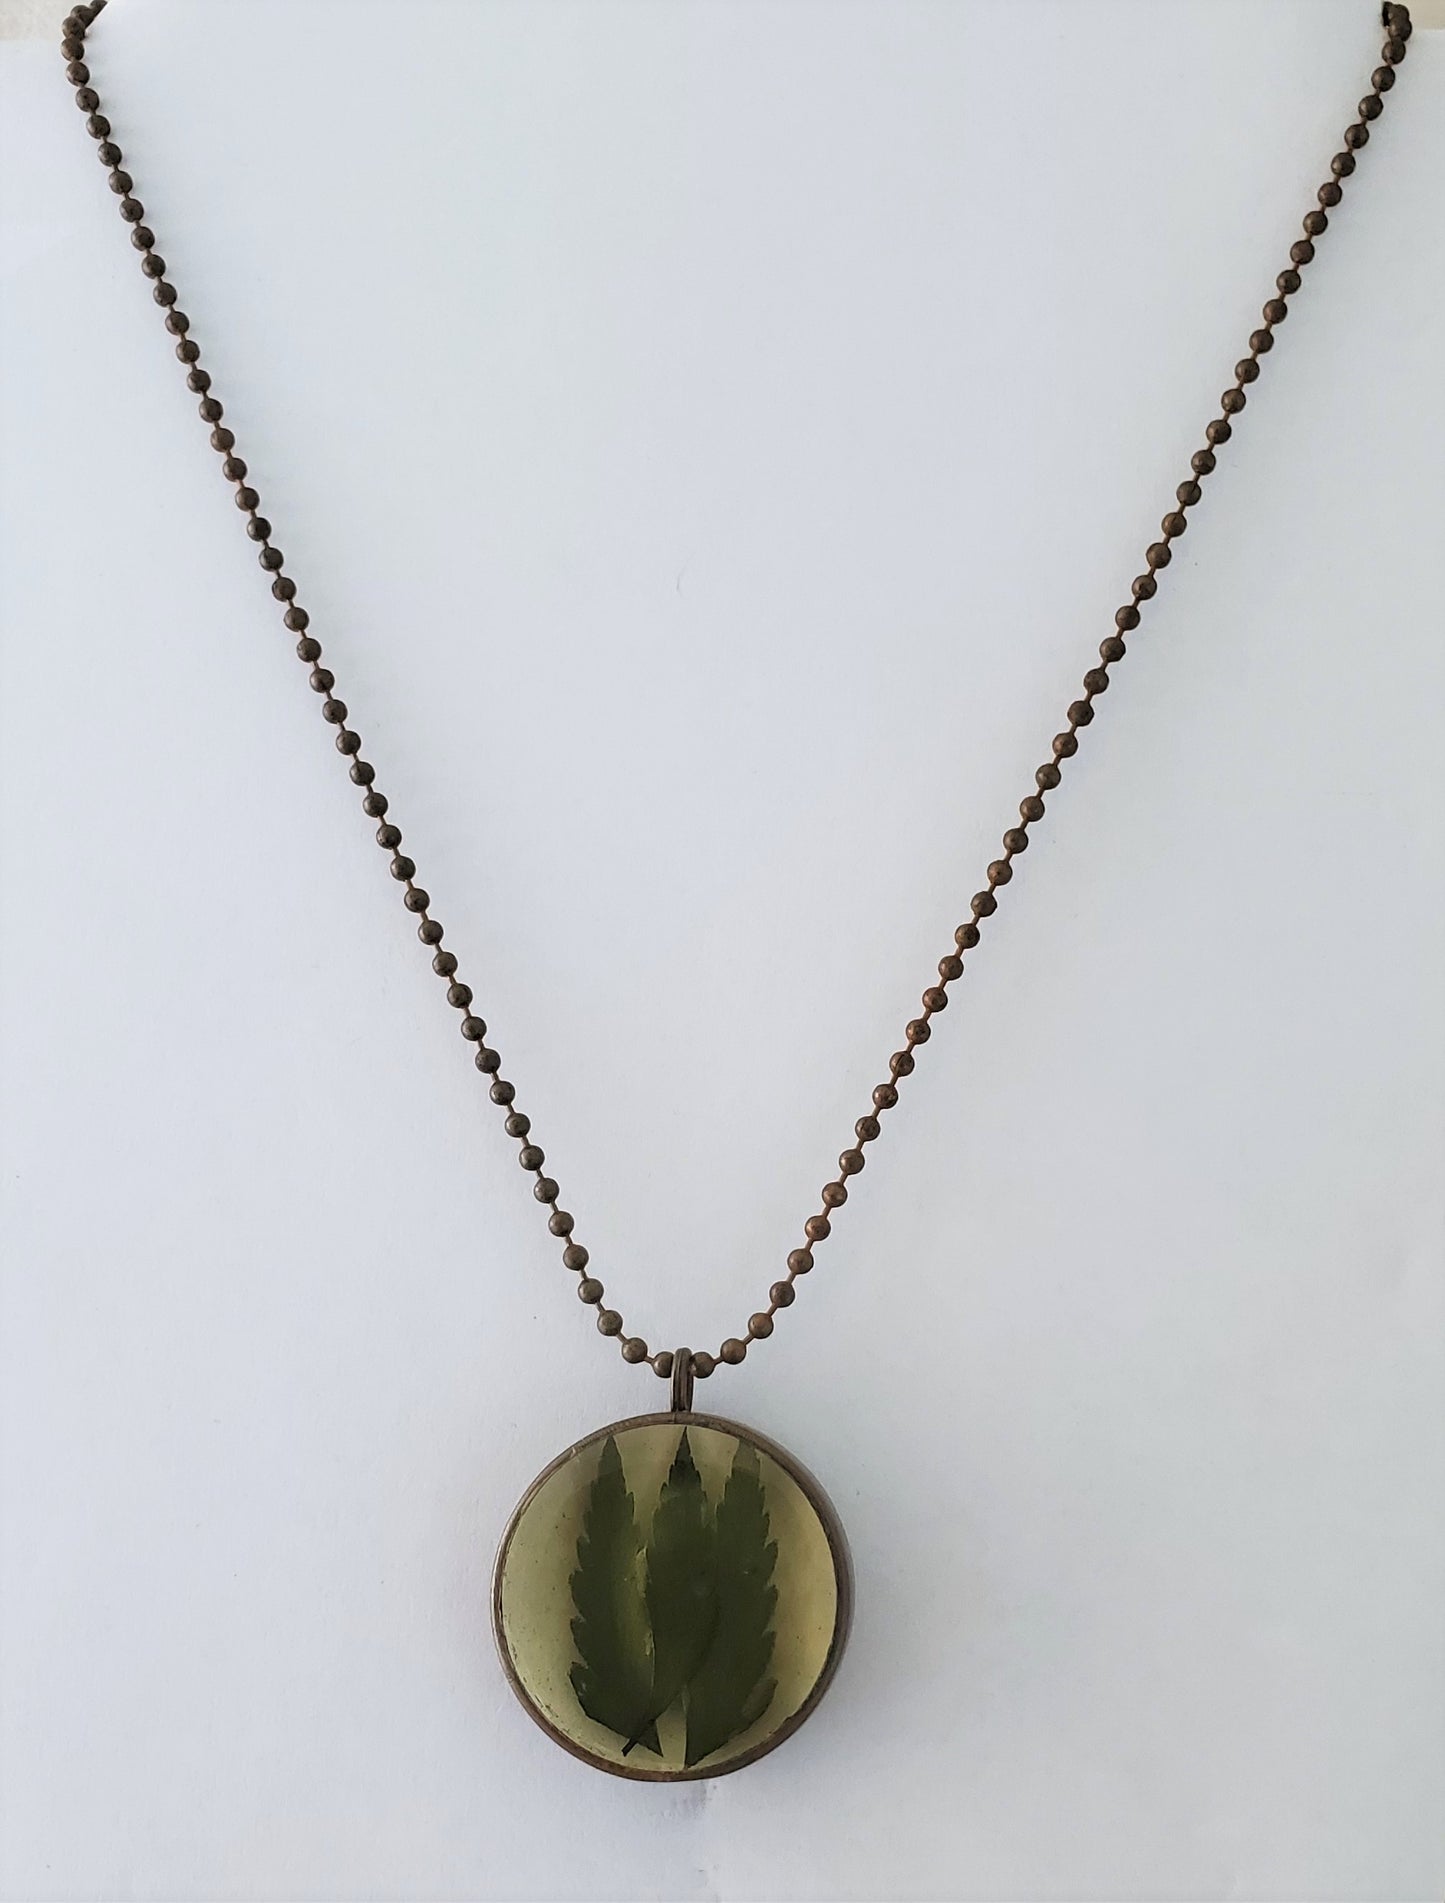 Hand crafted Fern Resin Necklace